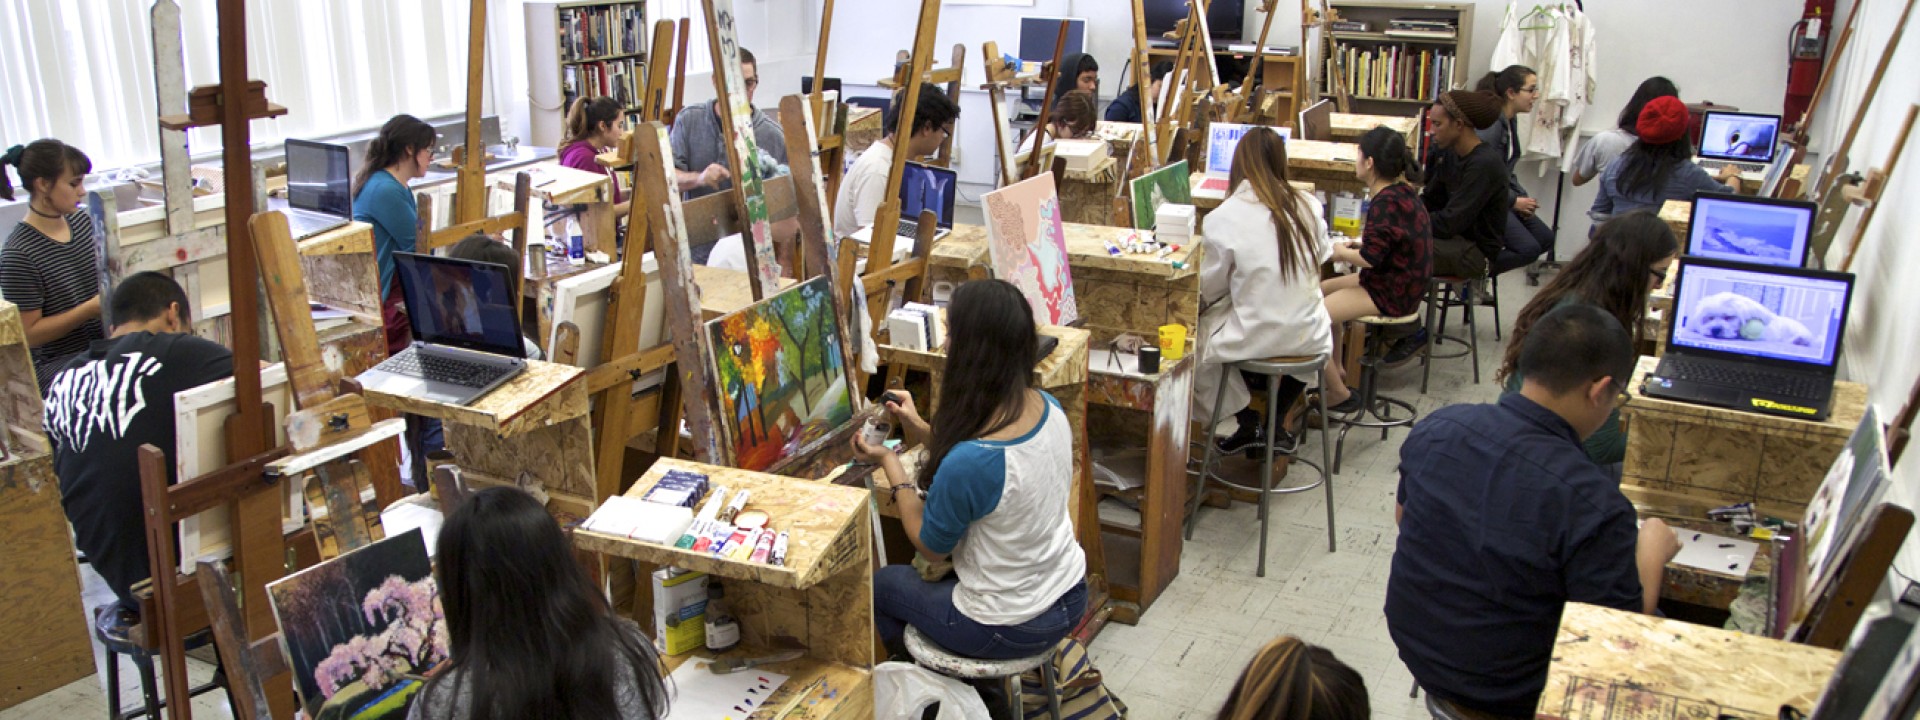 Image of students in a painting studio with easels, shot from above